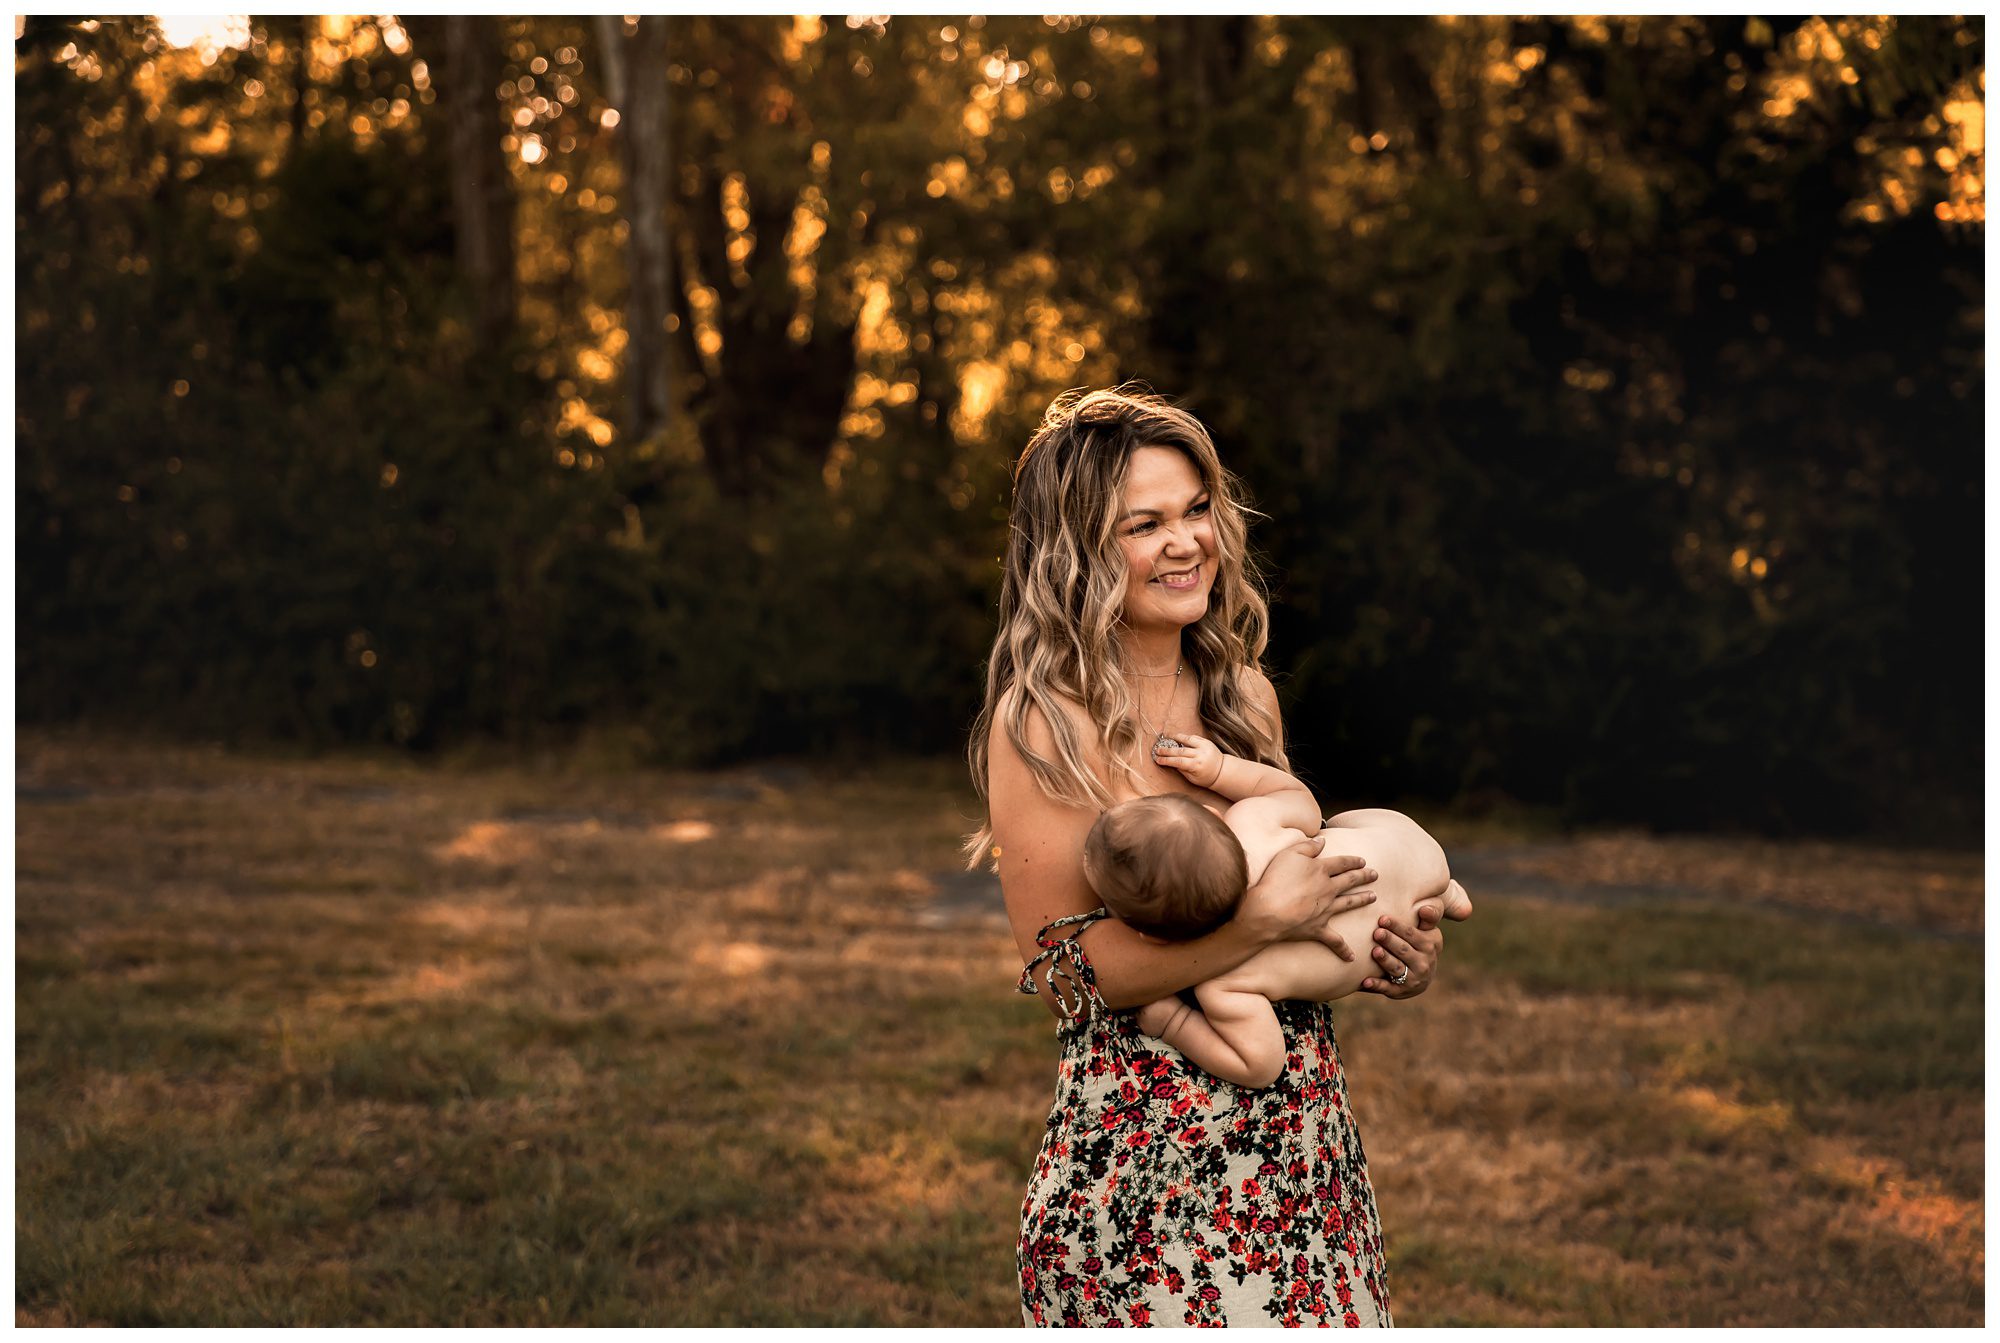 Breastfeeding photograph | Mommy and Me photography | Mother and child breastfeeding photo shoot | Murfreesboro, TN family photographer and motherhood photographer doing an outdoor breastfeeding session outside of Nashville, TN